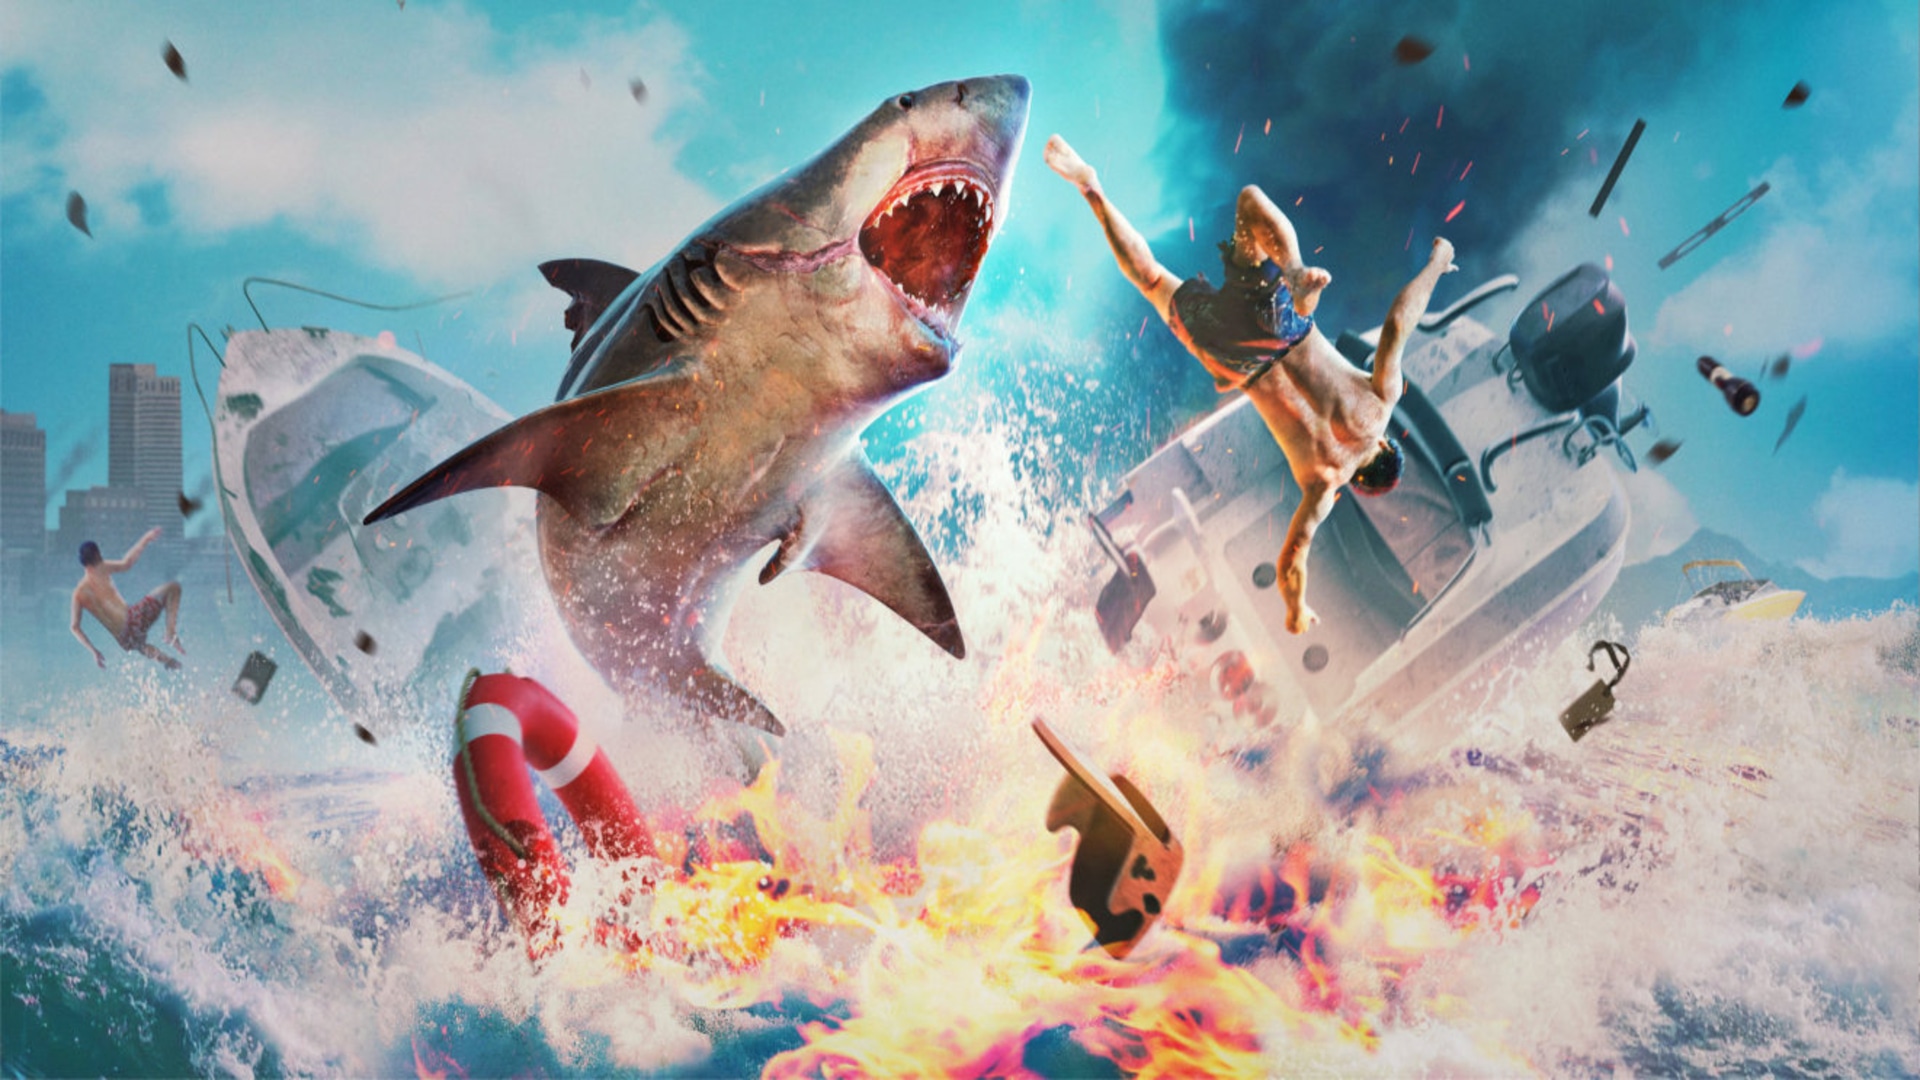 A shark causing explosions and carnage